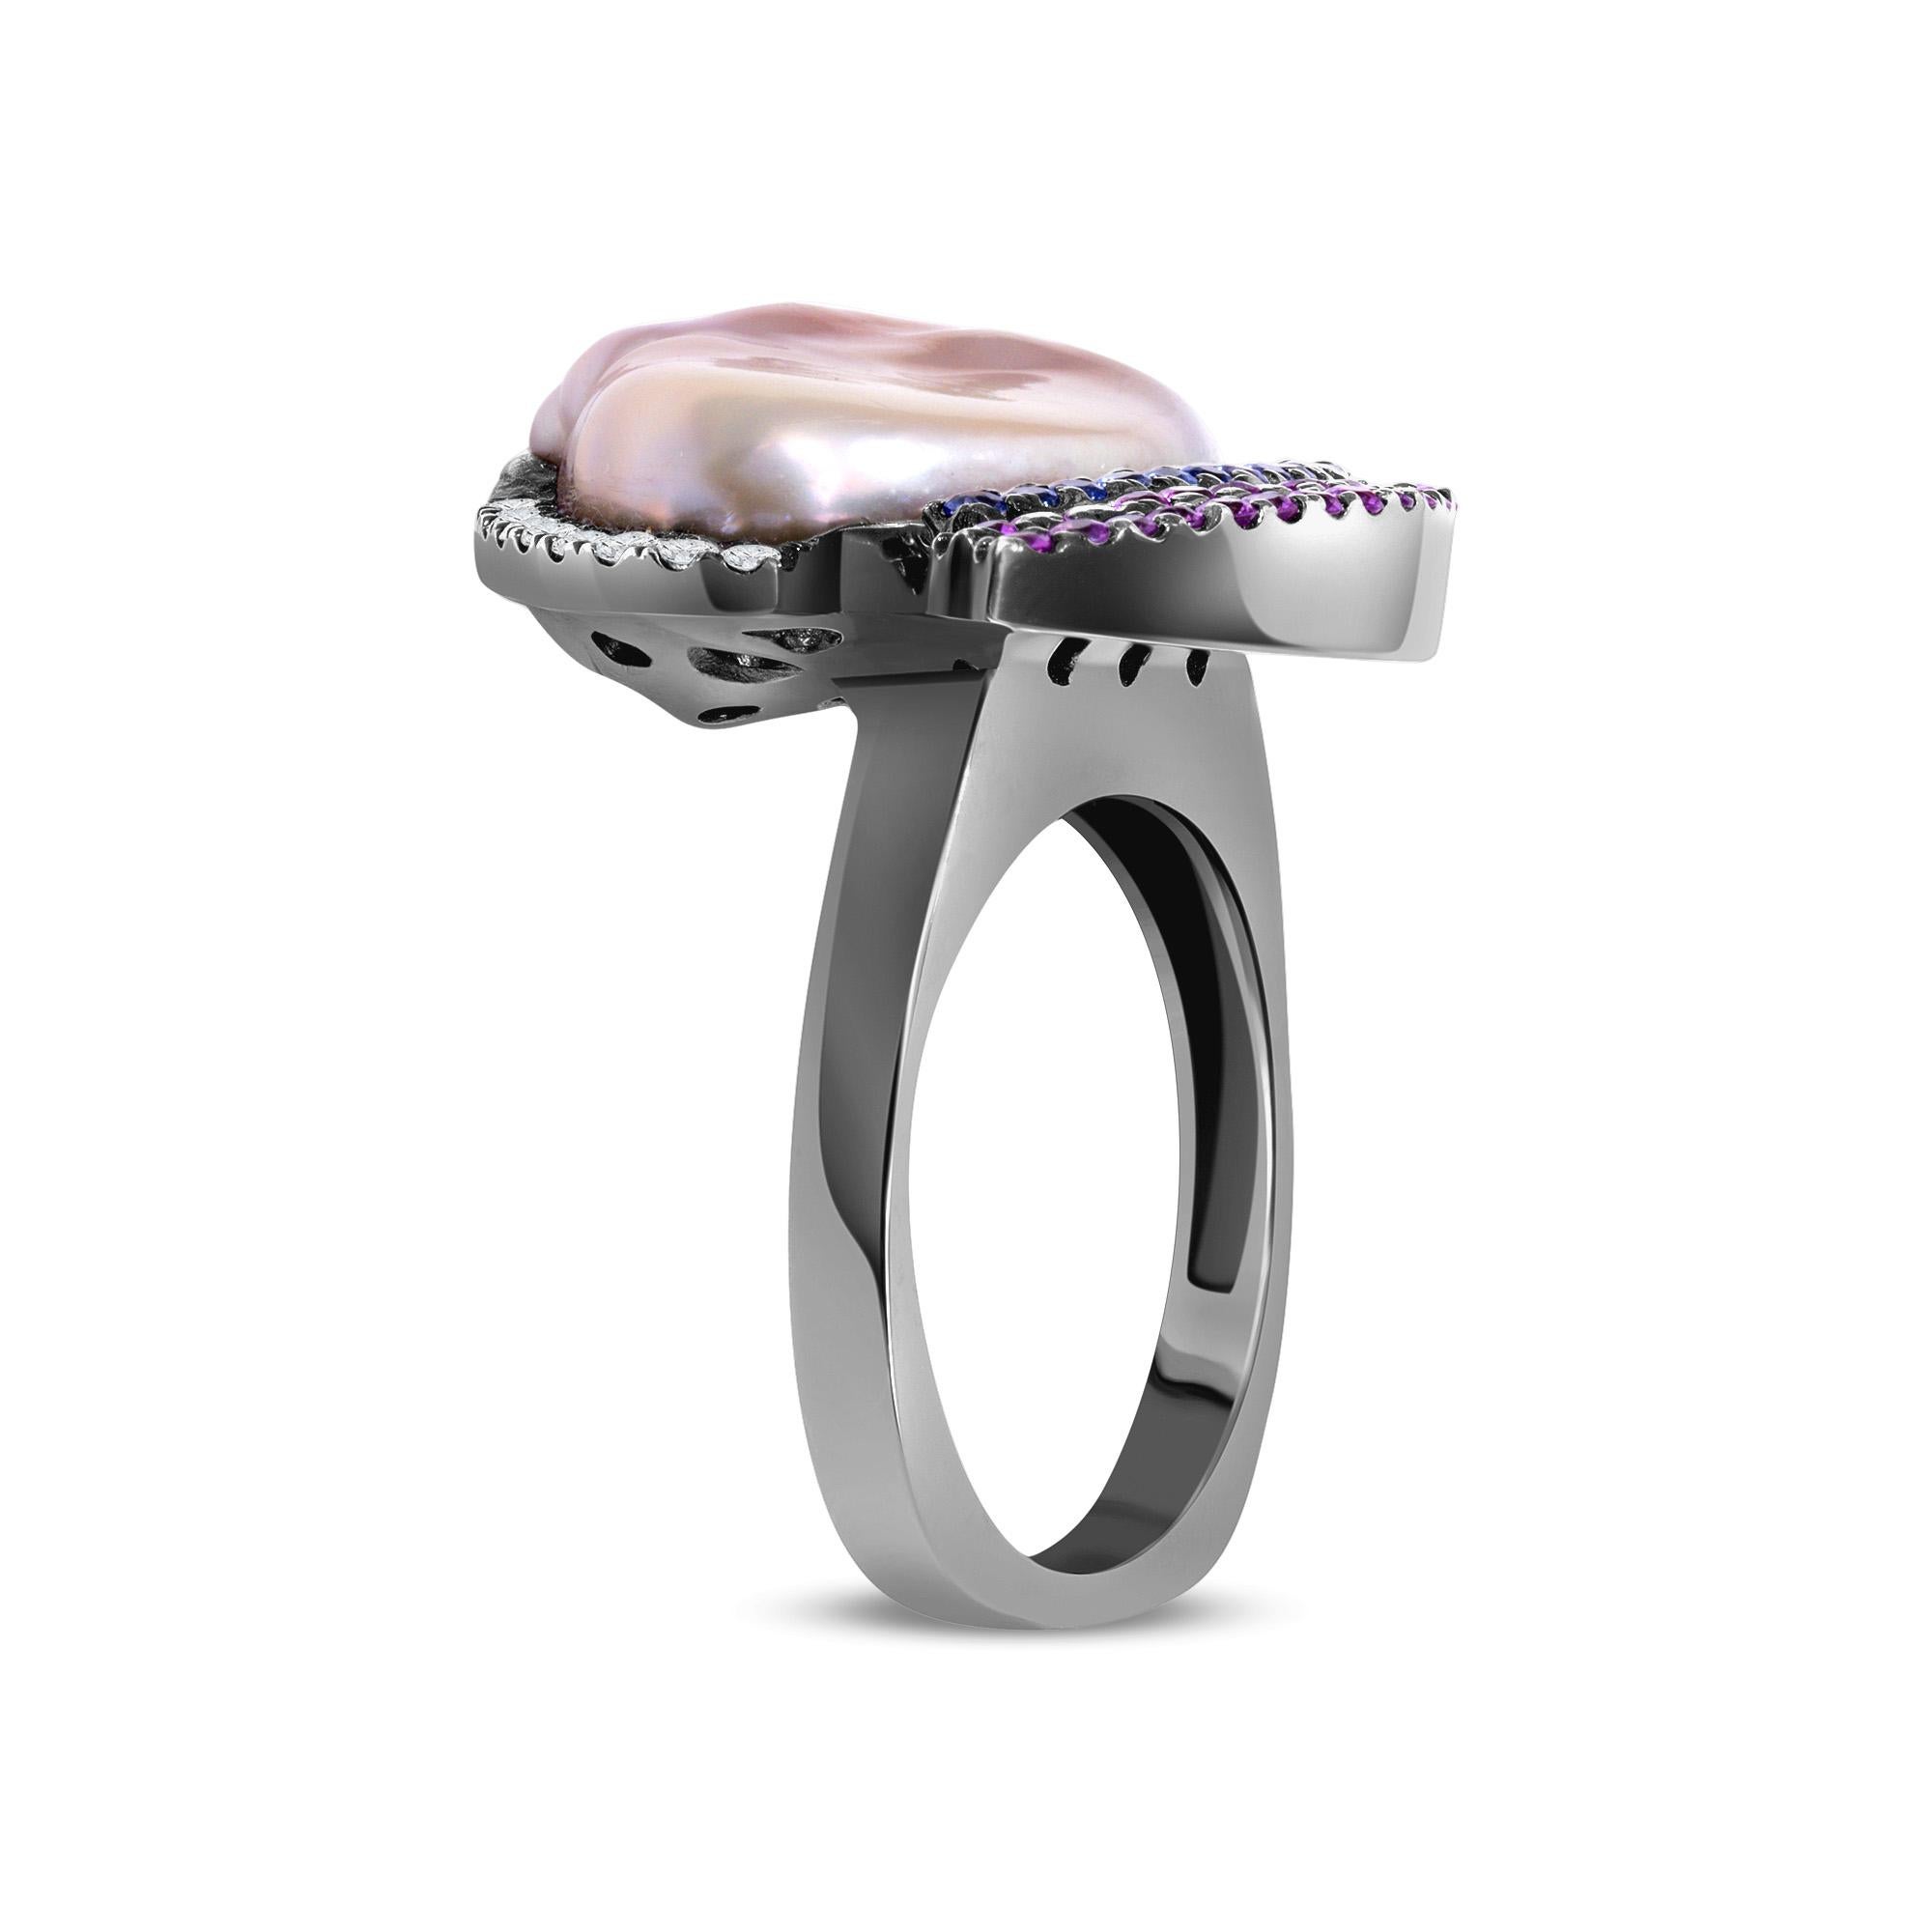 Natural Pink Cultured Pearl Pink and Blue Sapphire Diamond White Gold Rhodium Cocktail Ring. This cocktail ring is made of 18k white gold with black rhodium plating. This ring features a large wave-shaped, natural pink color, cultured pearl. Around